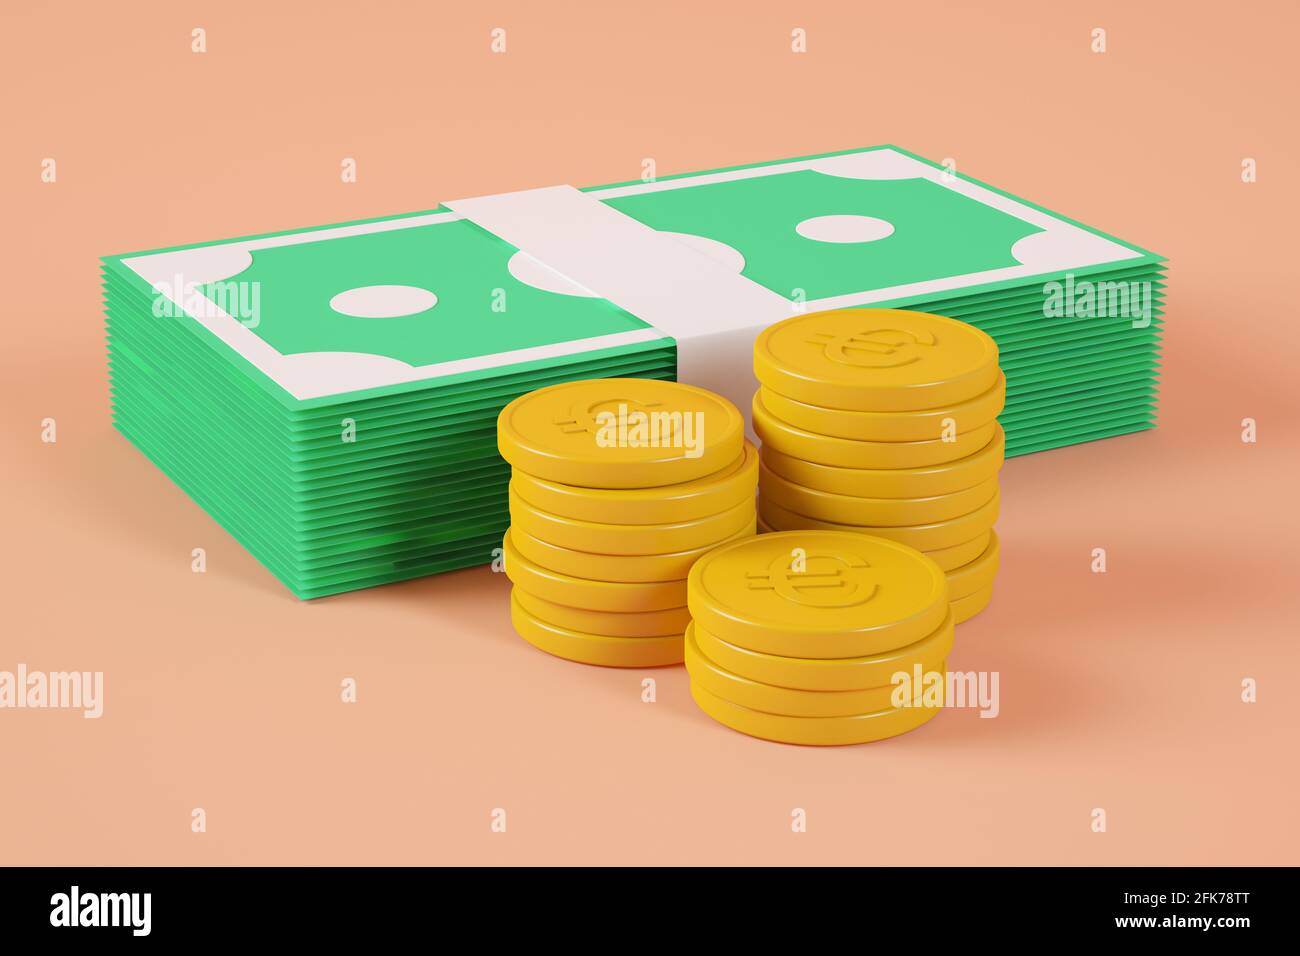 Bids and coins 3d rendering Stock Photo